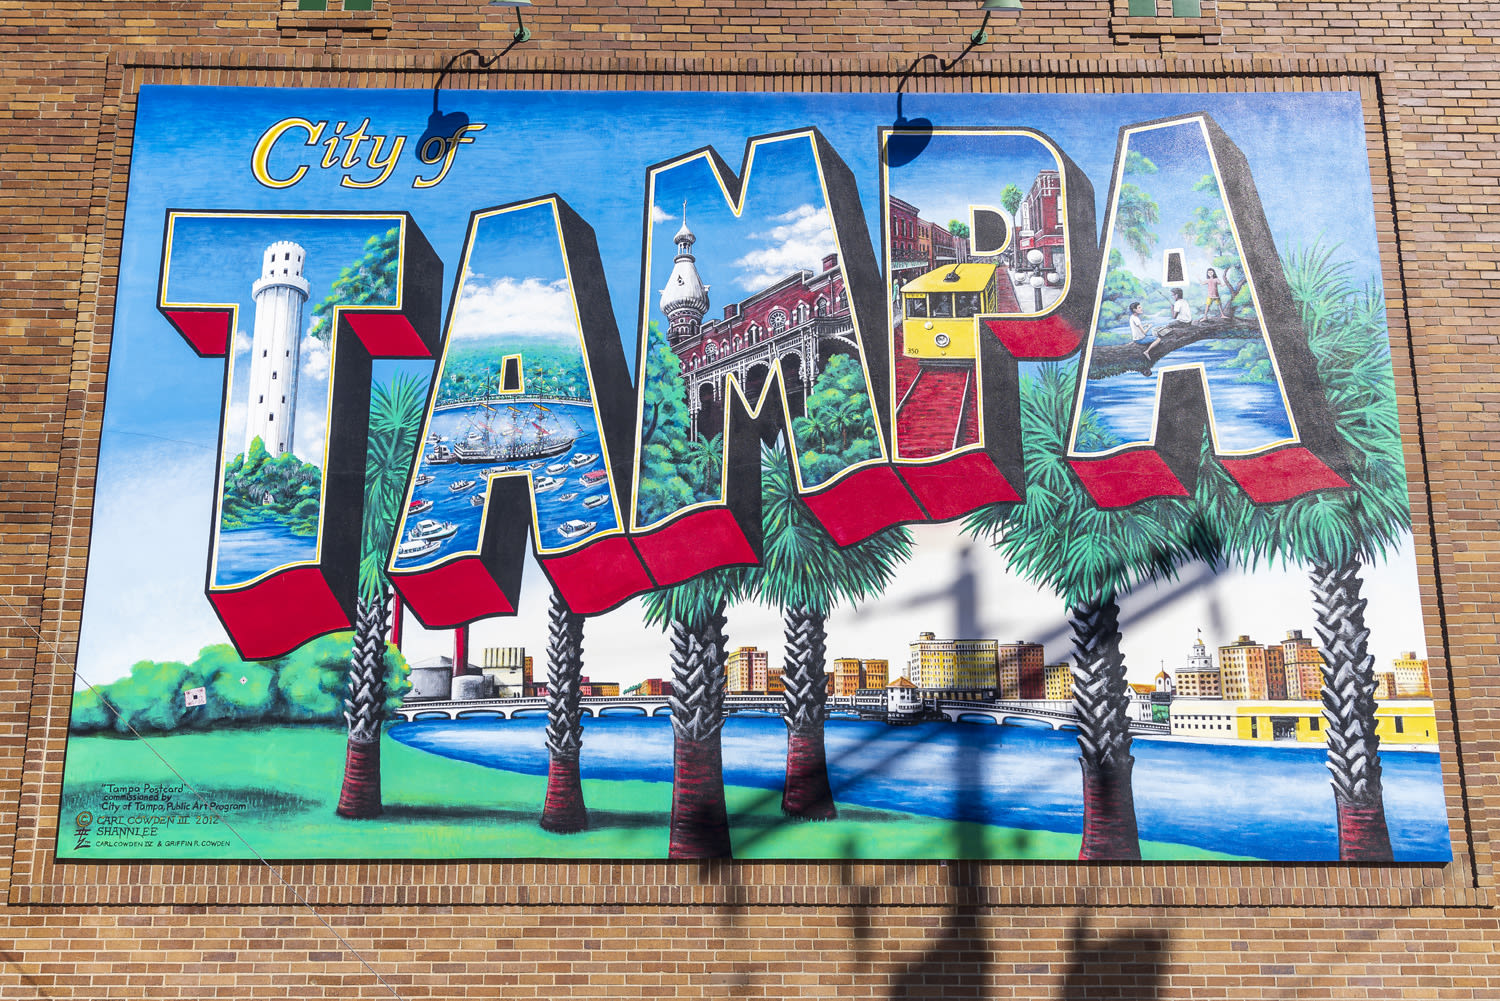 A mural in the city of Tampa